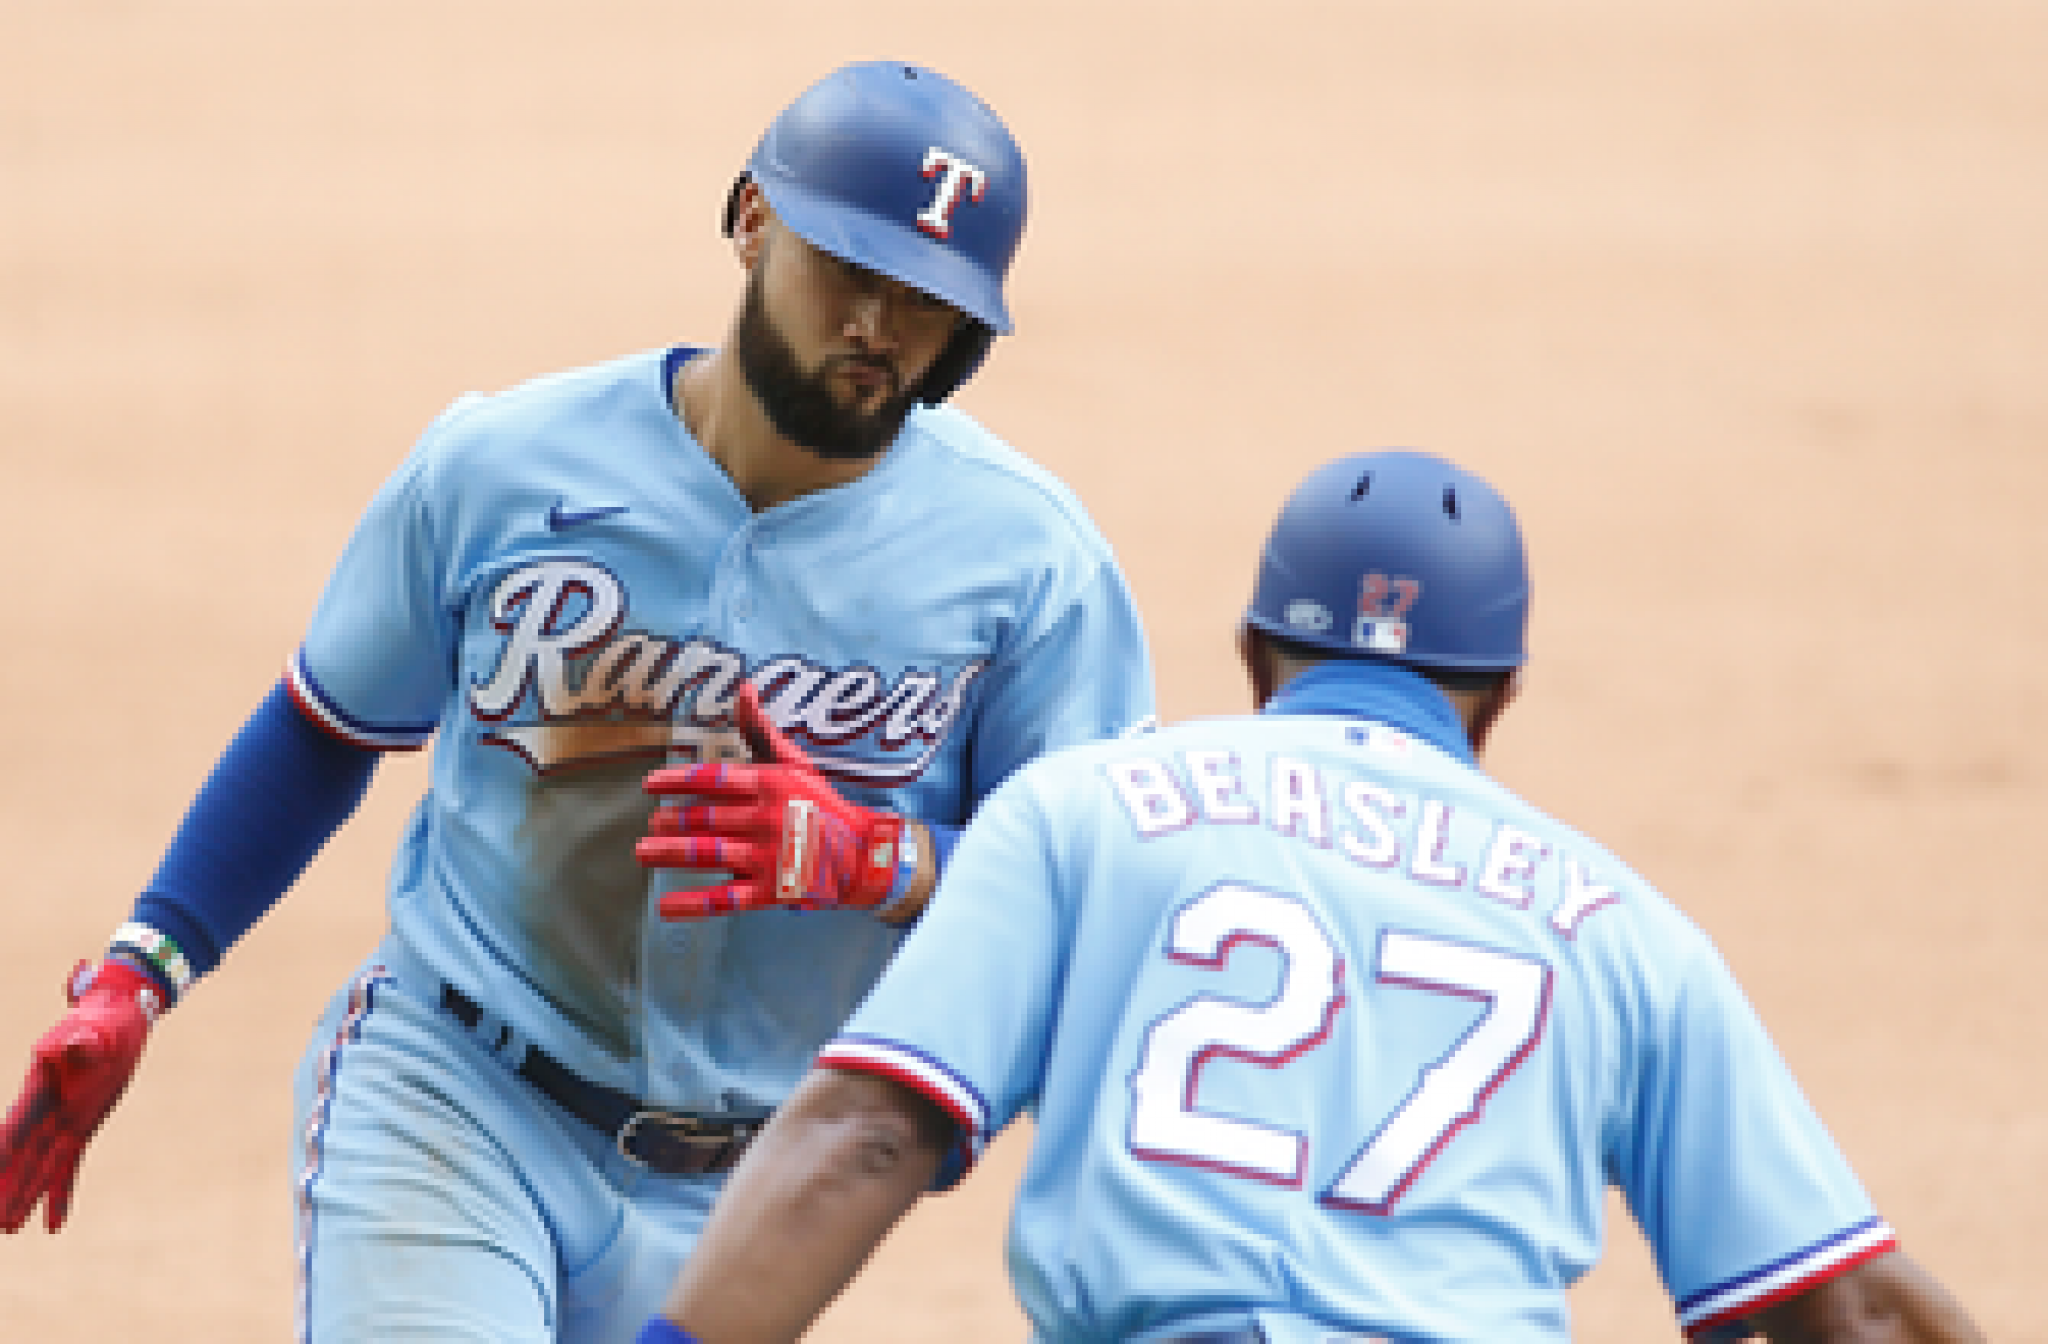 Isiah Kiner-Falefa goes 2-for-3 with a solo shot as Rangers top Red Sox, 5-3